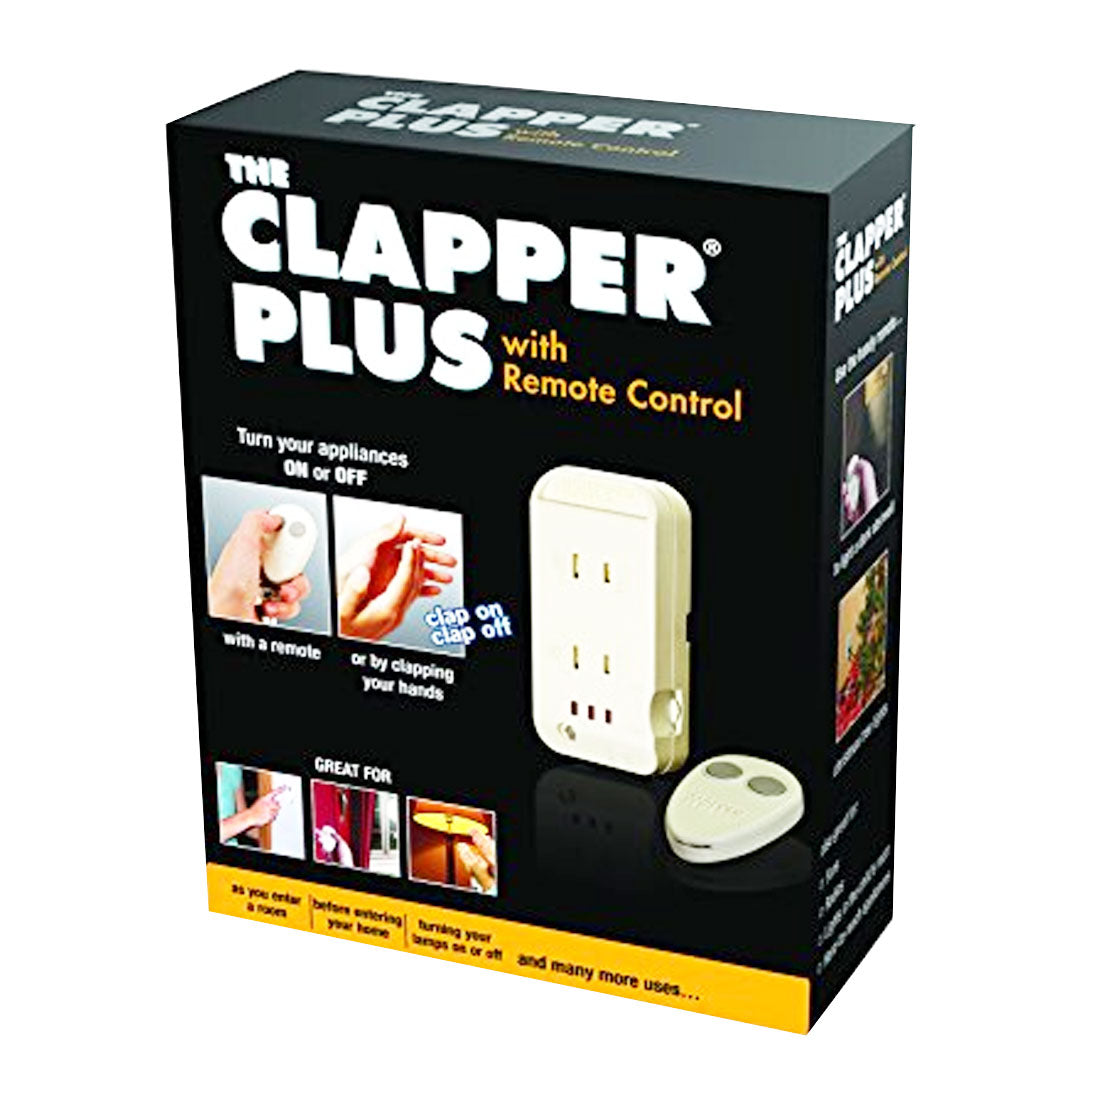 The Clapper Turn Lights On And Off Clap Activated W/ Clap